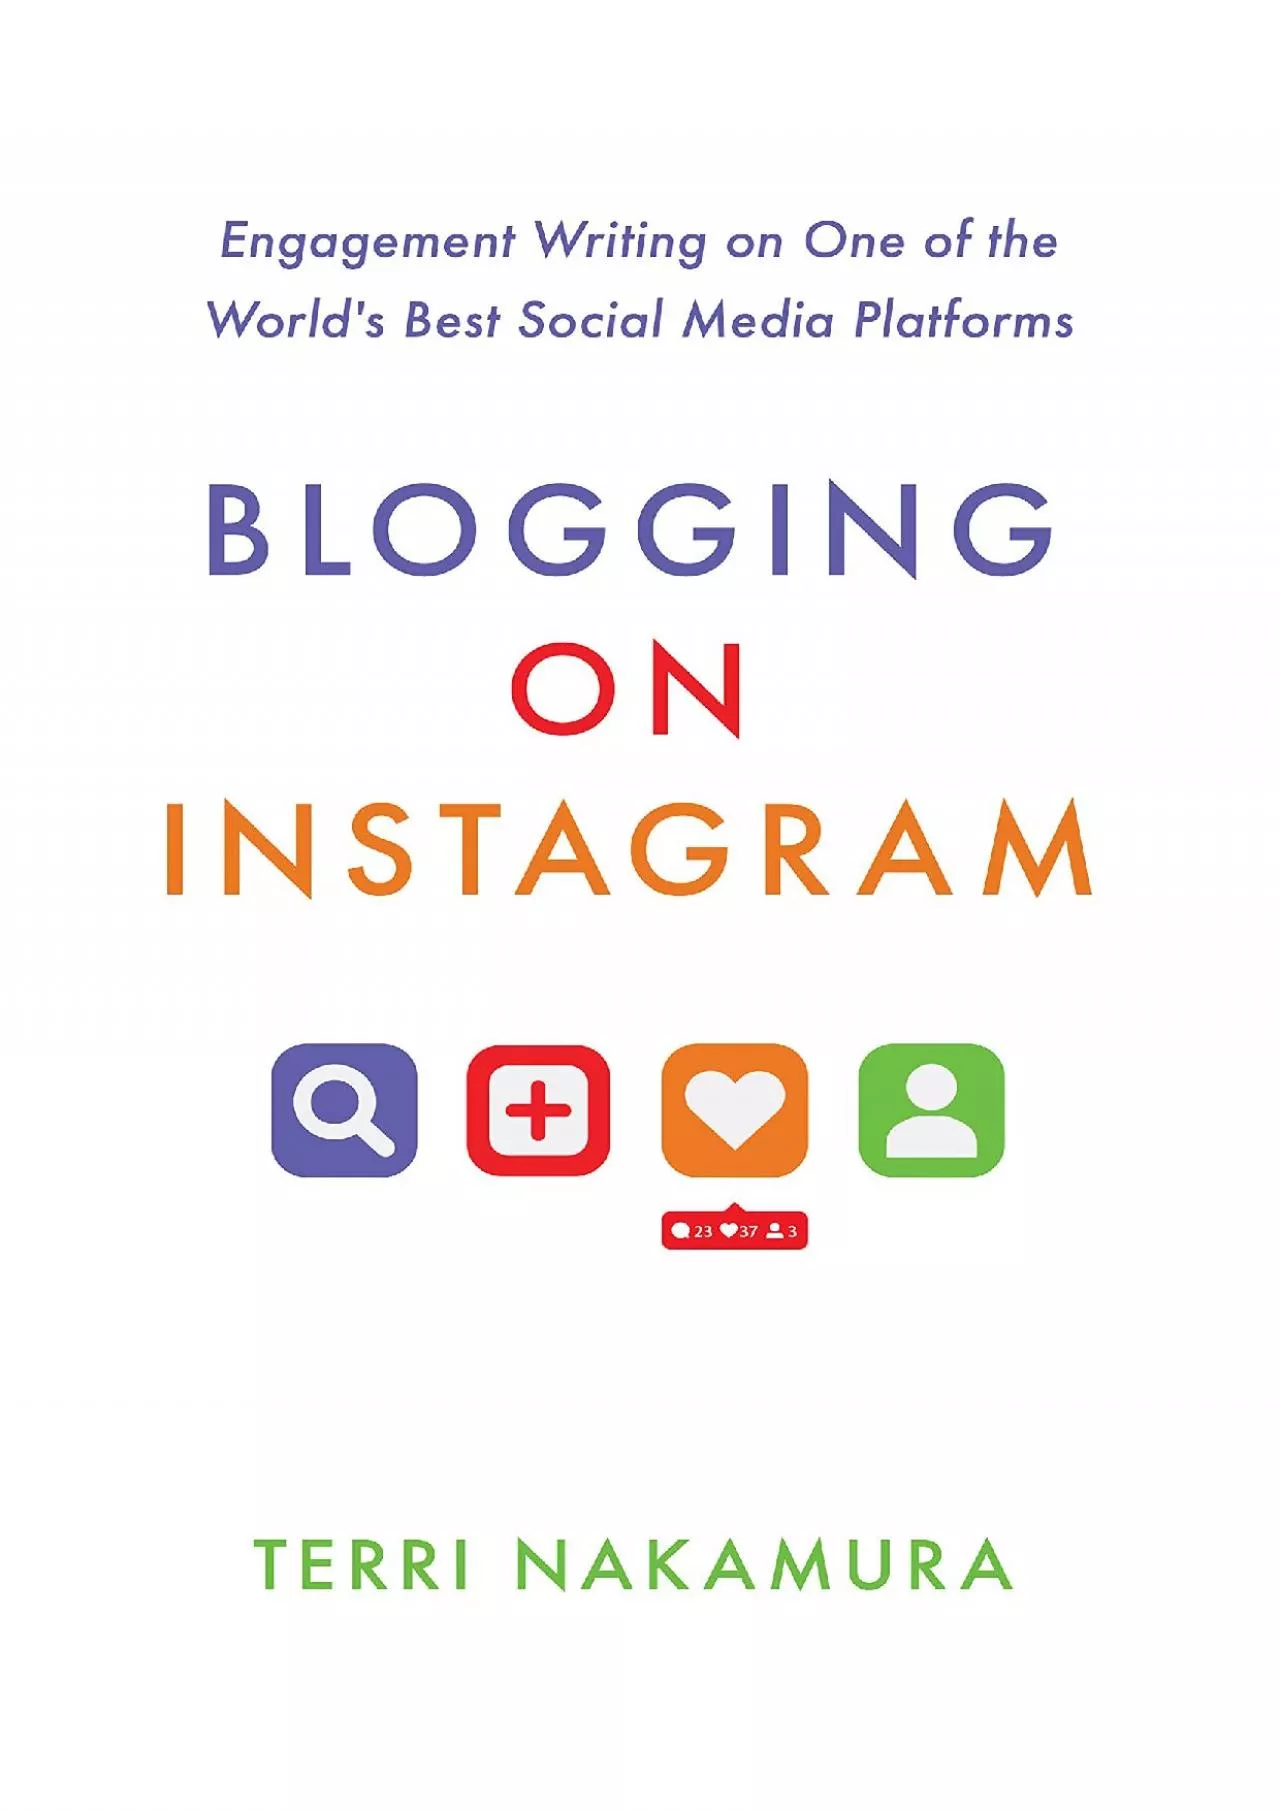 Blogging on Instagram: Engagement Writing on One of the World’s Best Social Media Platforms